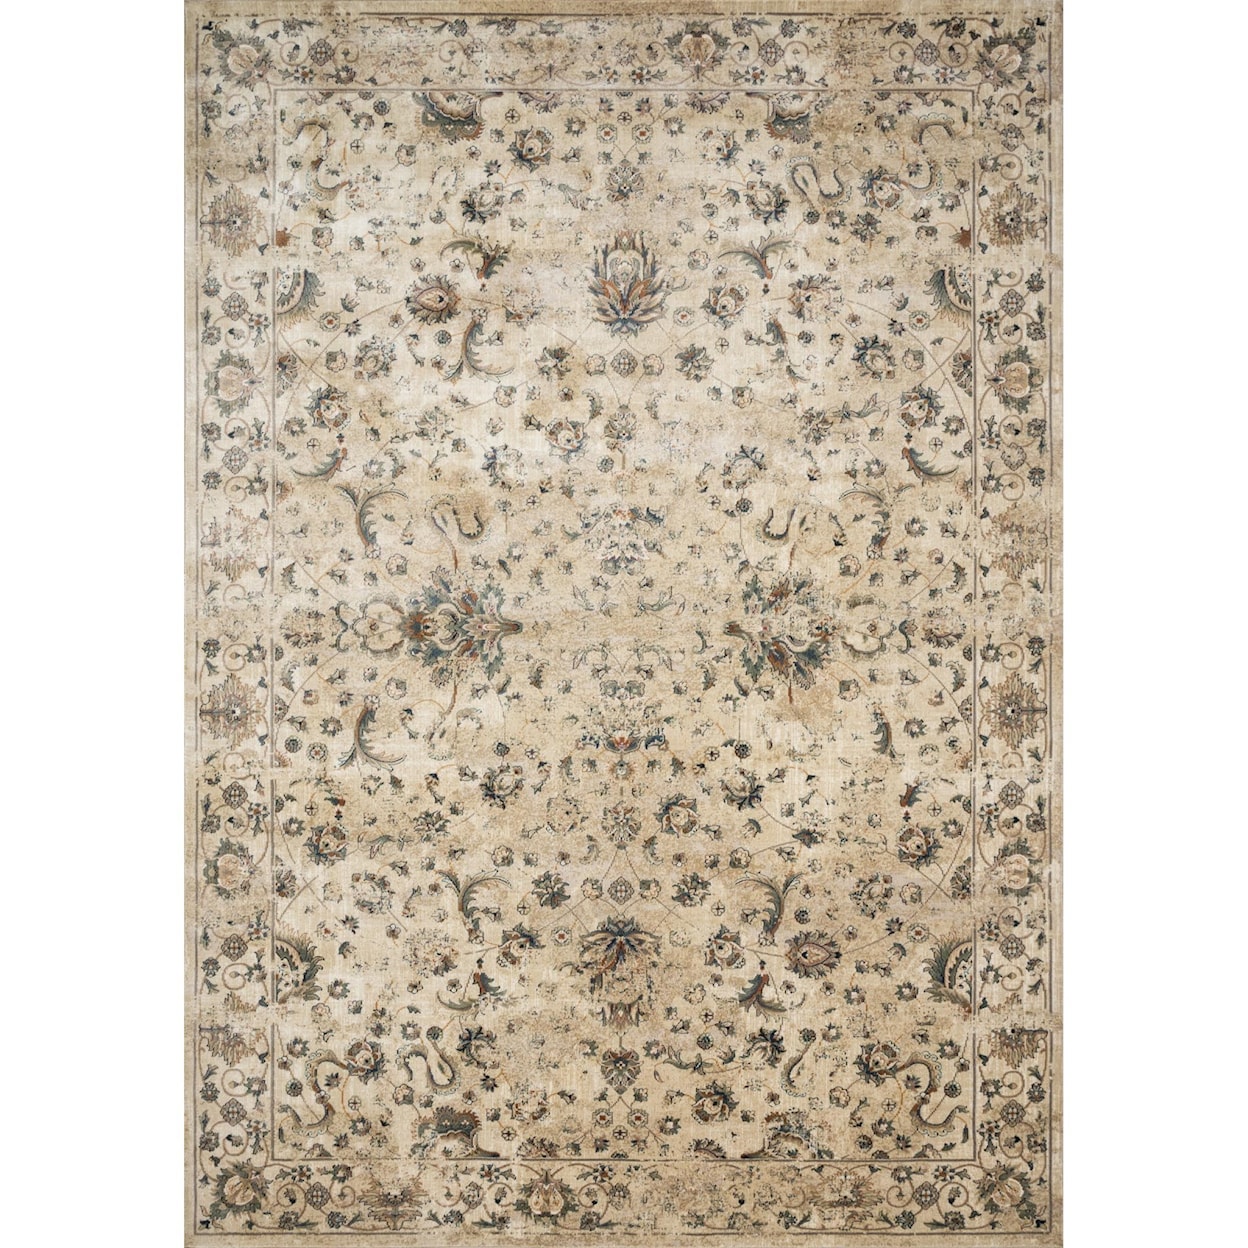 Magnolia Home by Joanna Gaines for Loloi Evie 9'-2" x 13' Rectangle Rug